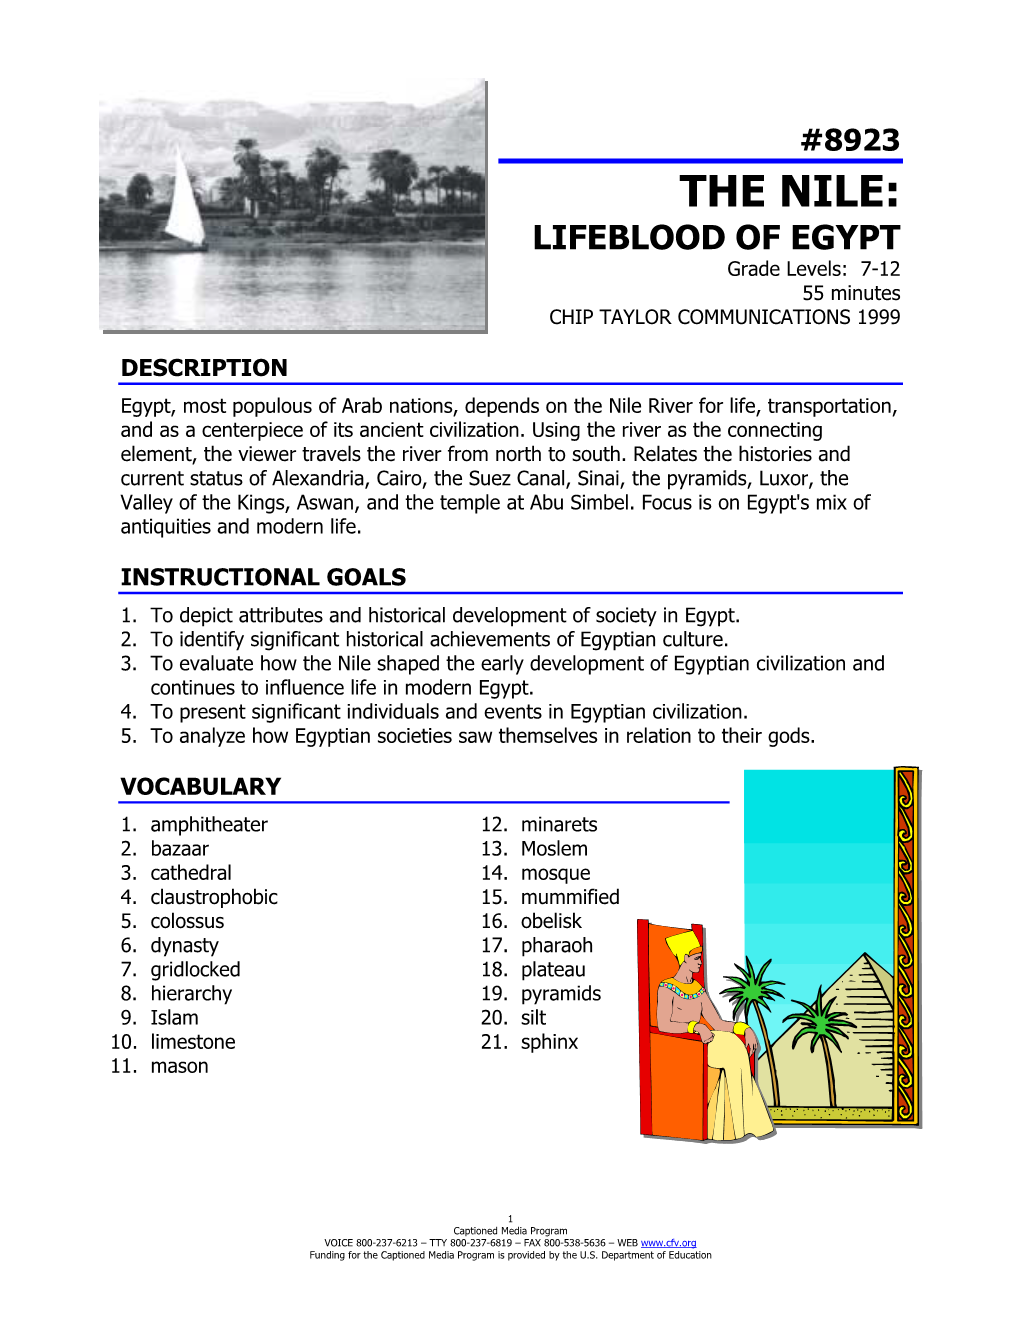 8923 the NILE: LIFEBLOOD of EGYPT Grade Levels: 7-12 55 Minutes CHIP TAYLOR COMMUNICATIONS 1999